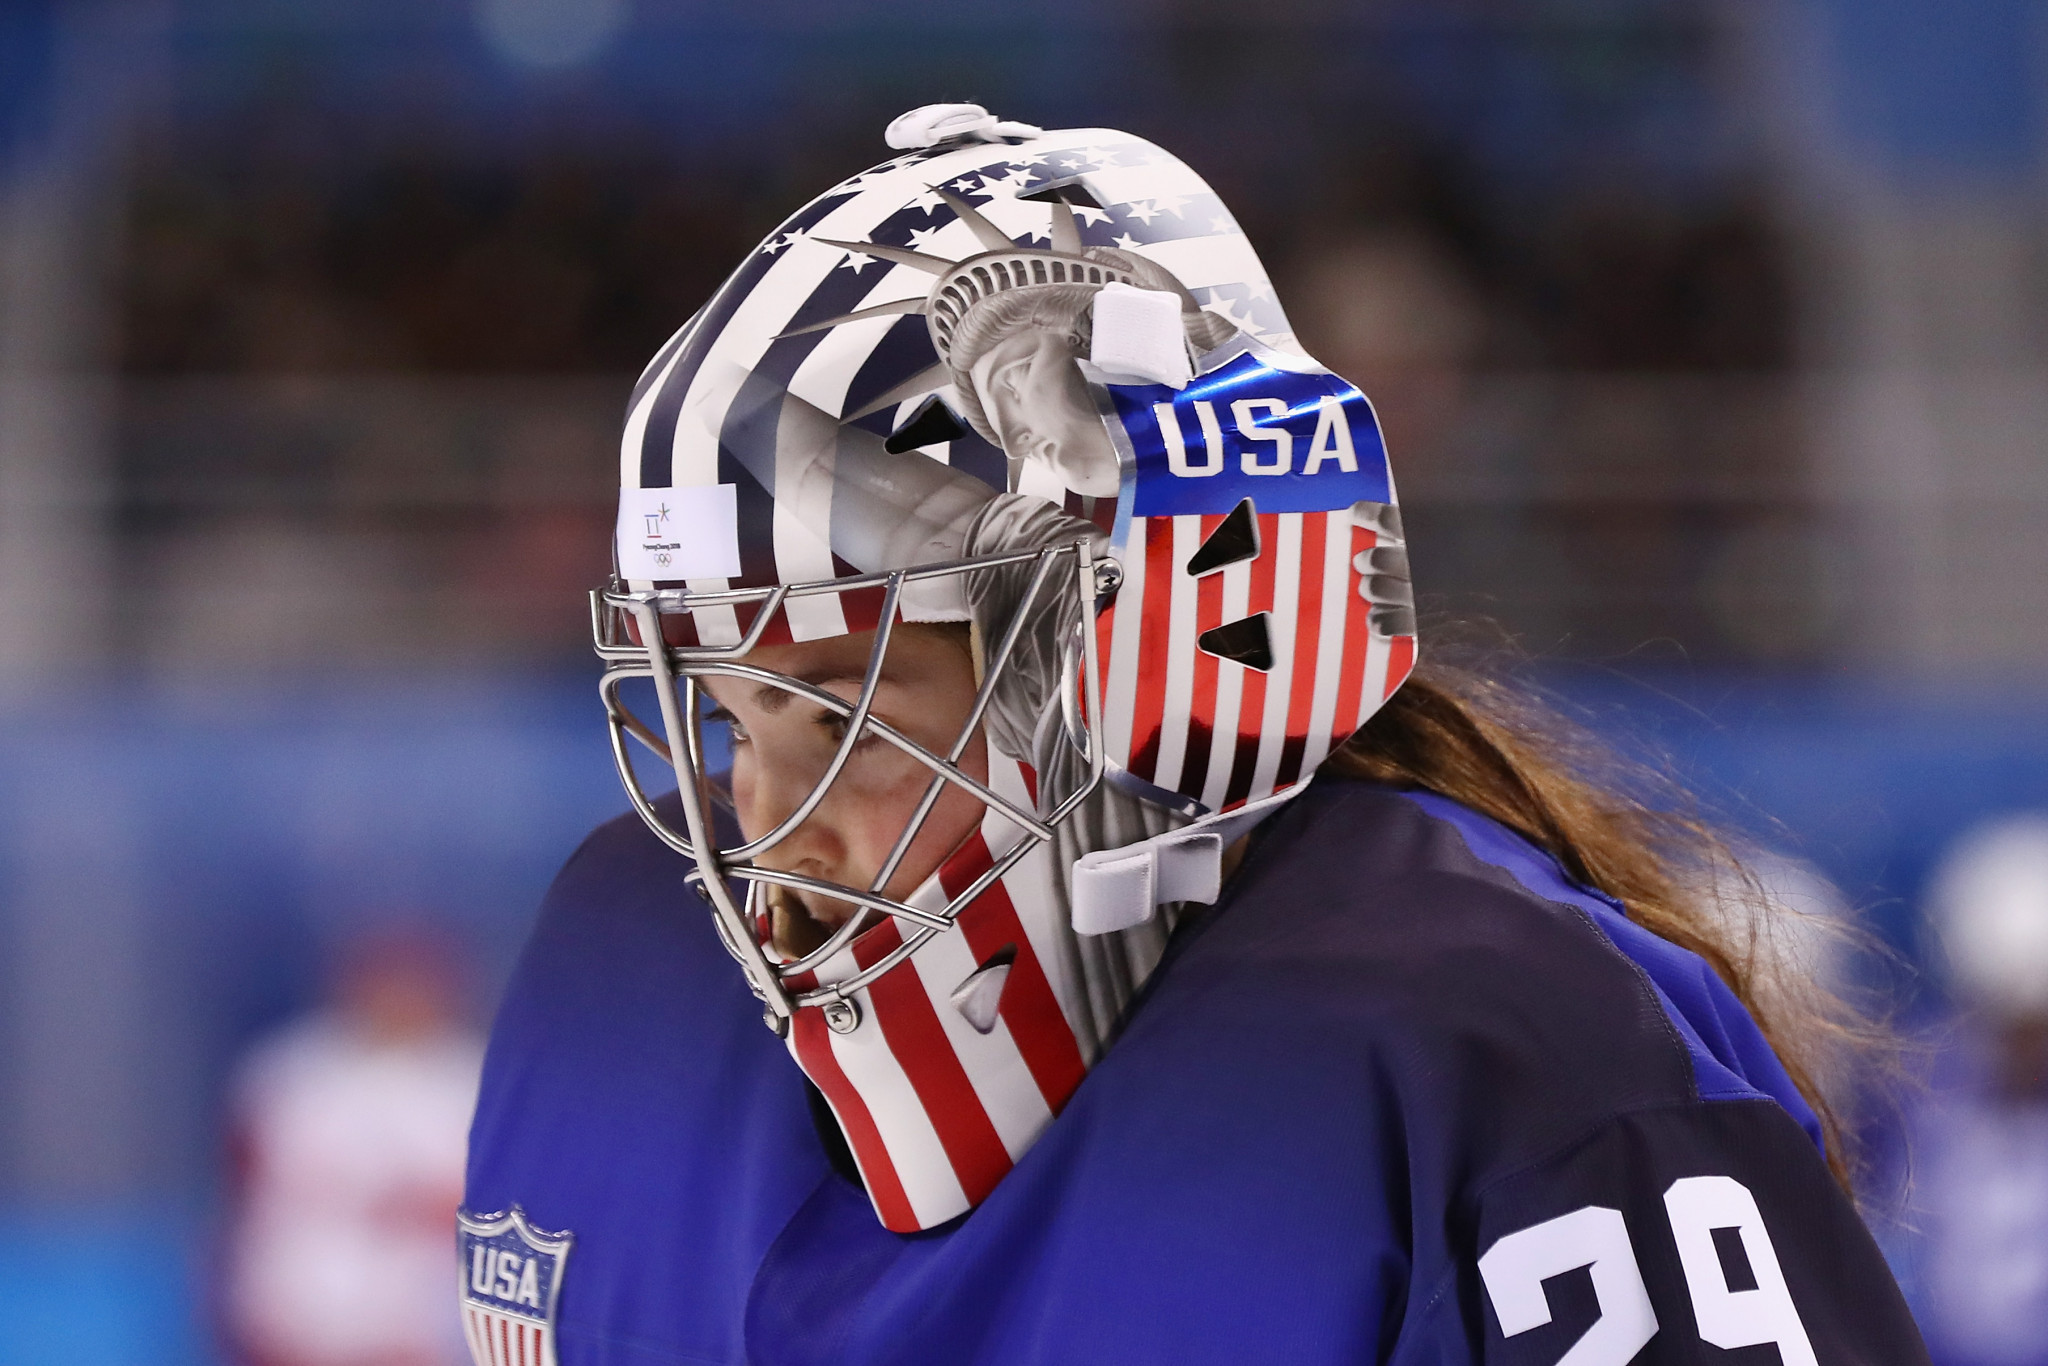 American ice hockey goaltenders Nicole Hensley and Alex Rigsby are free to wear helmets depicting the Statue of Liberty ©Getty Images